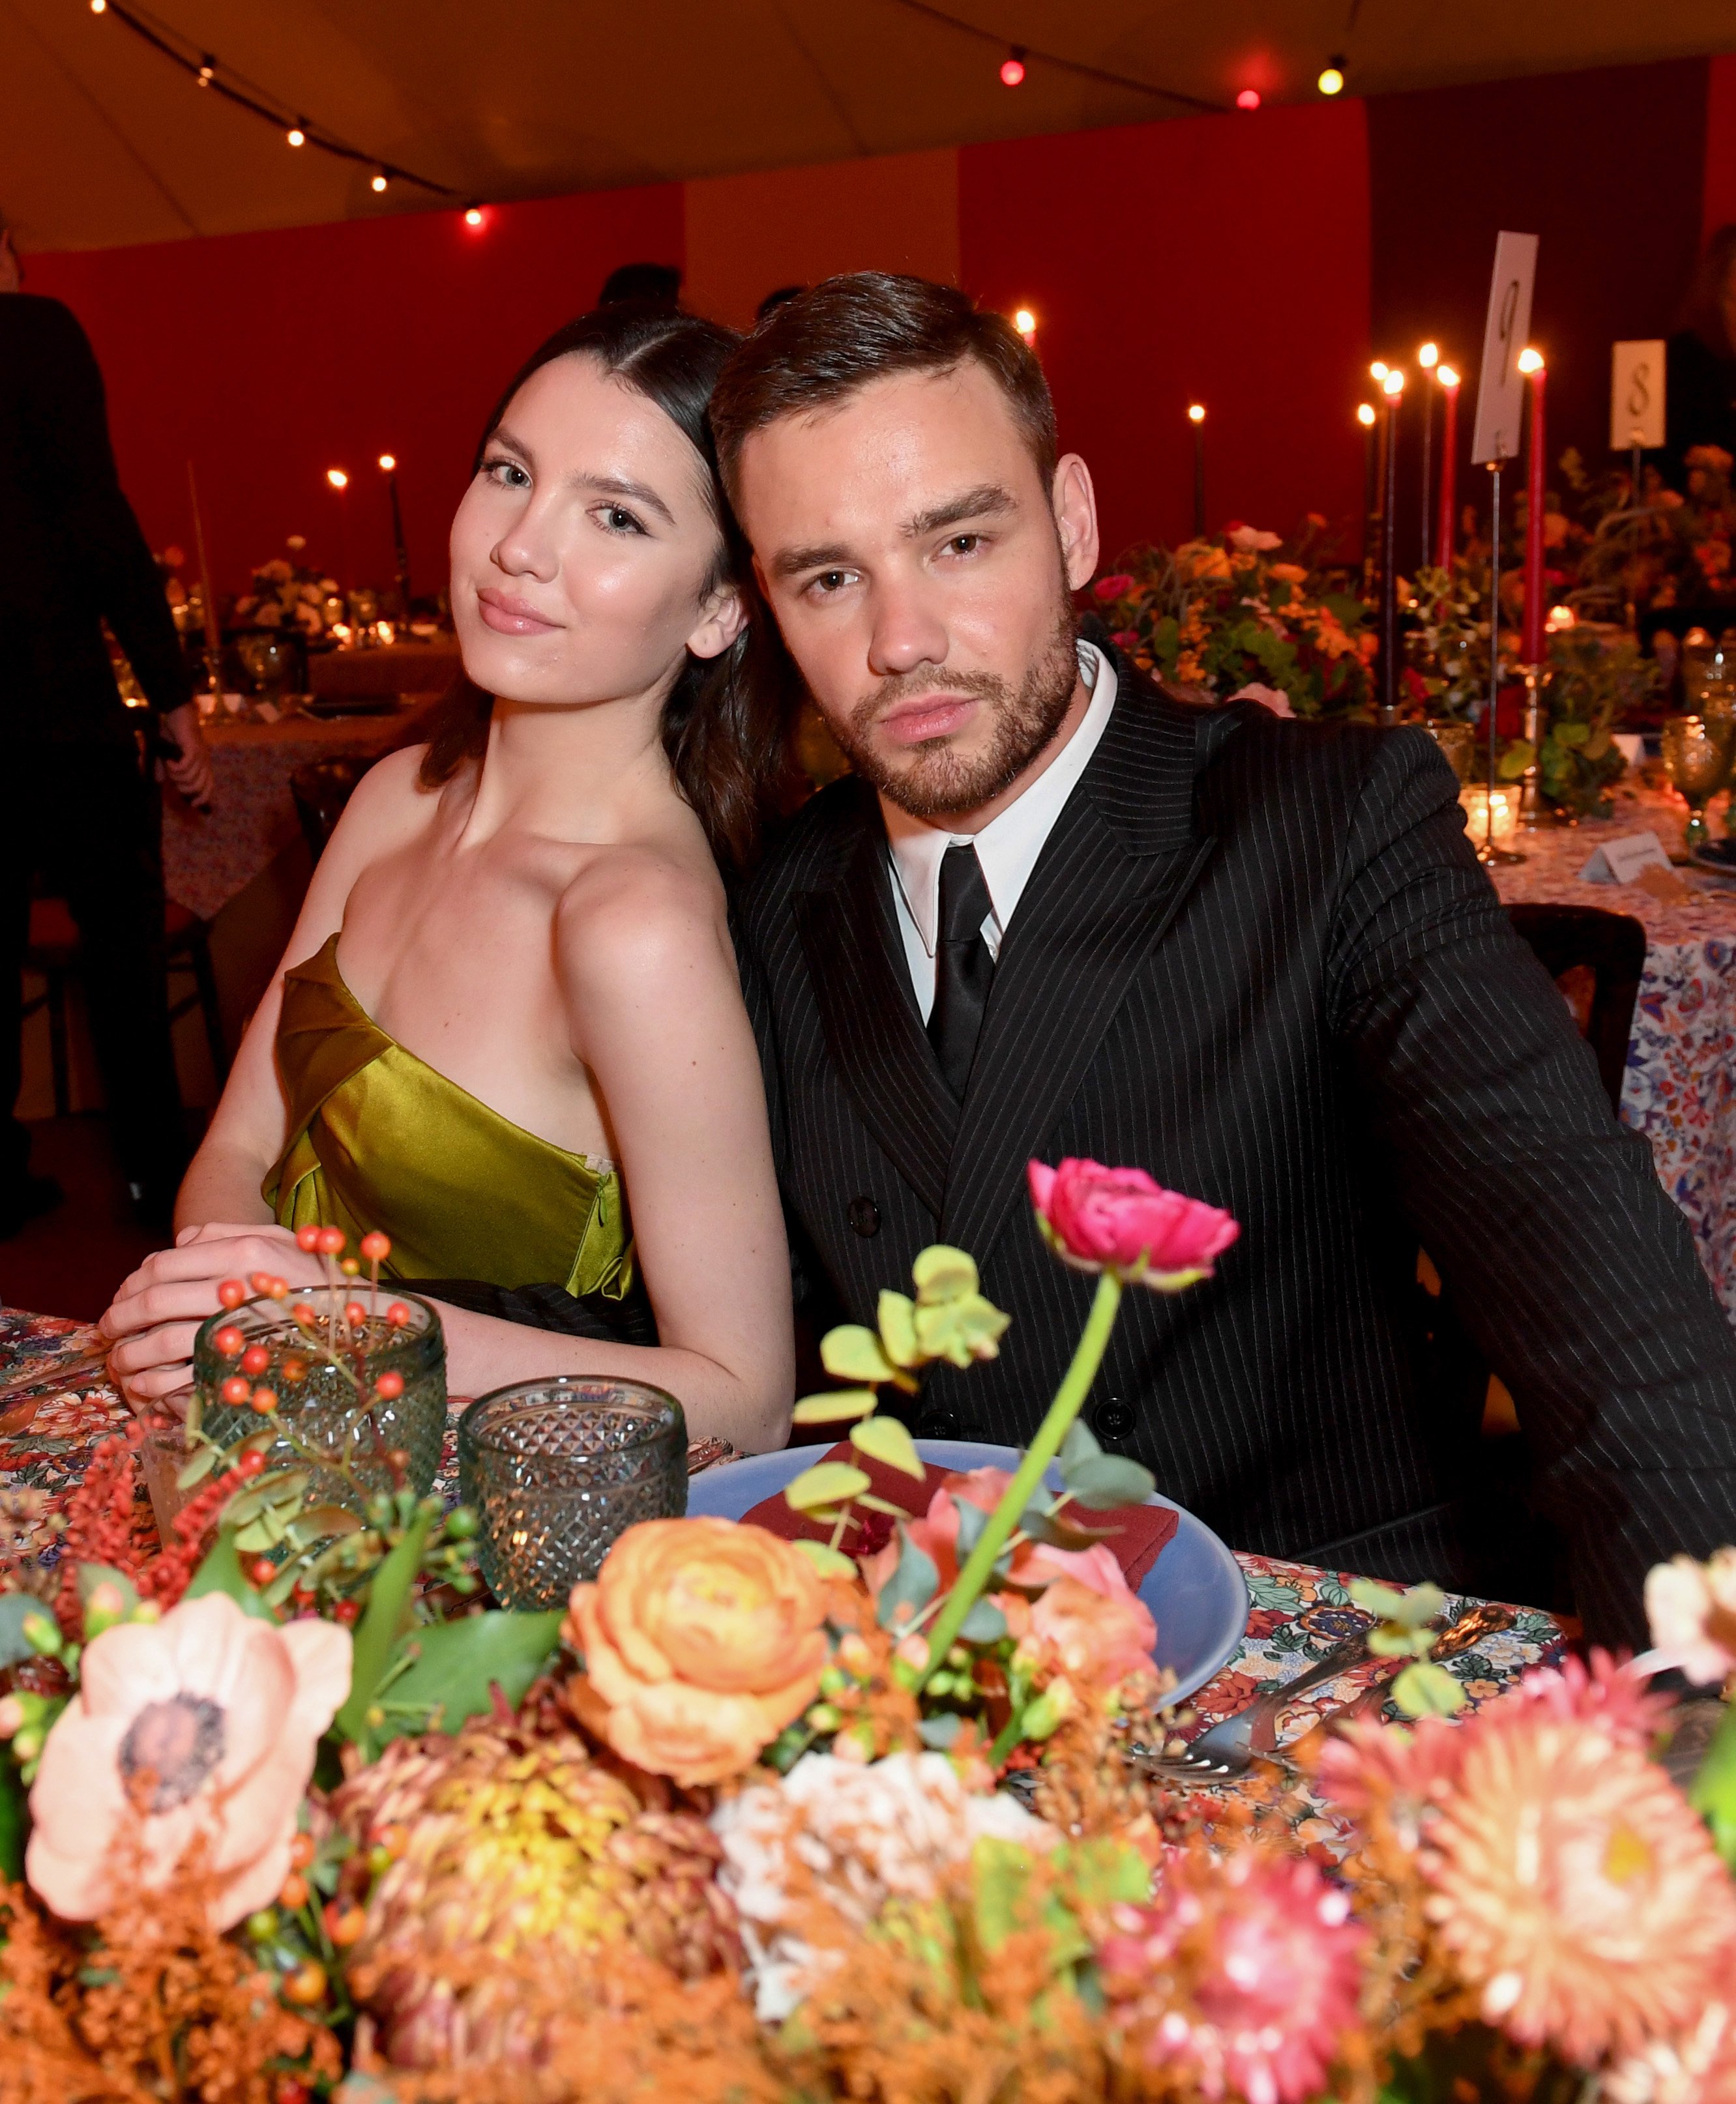 Liam Payne and Maya Henry at the gala dinner in honor of Edward Enninful on November 22, 2019 in Oxfordshire, England. | Source: Getty Images